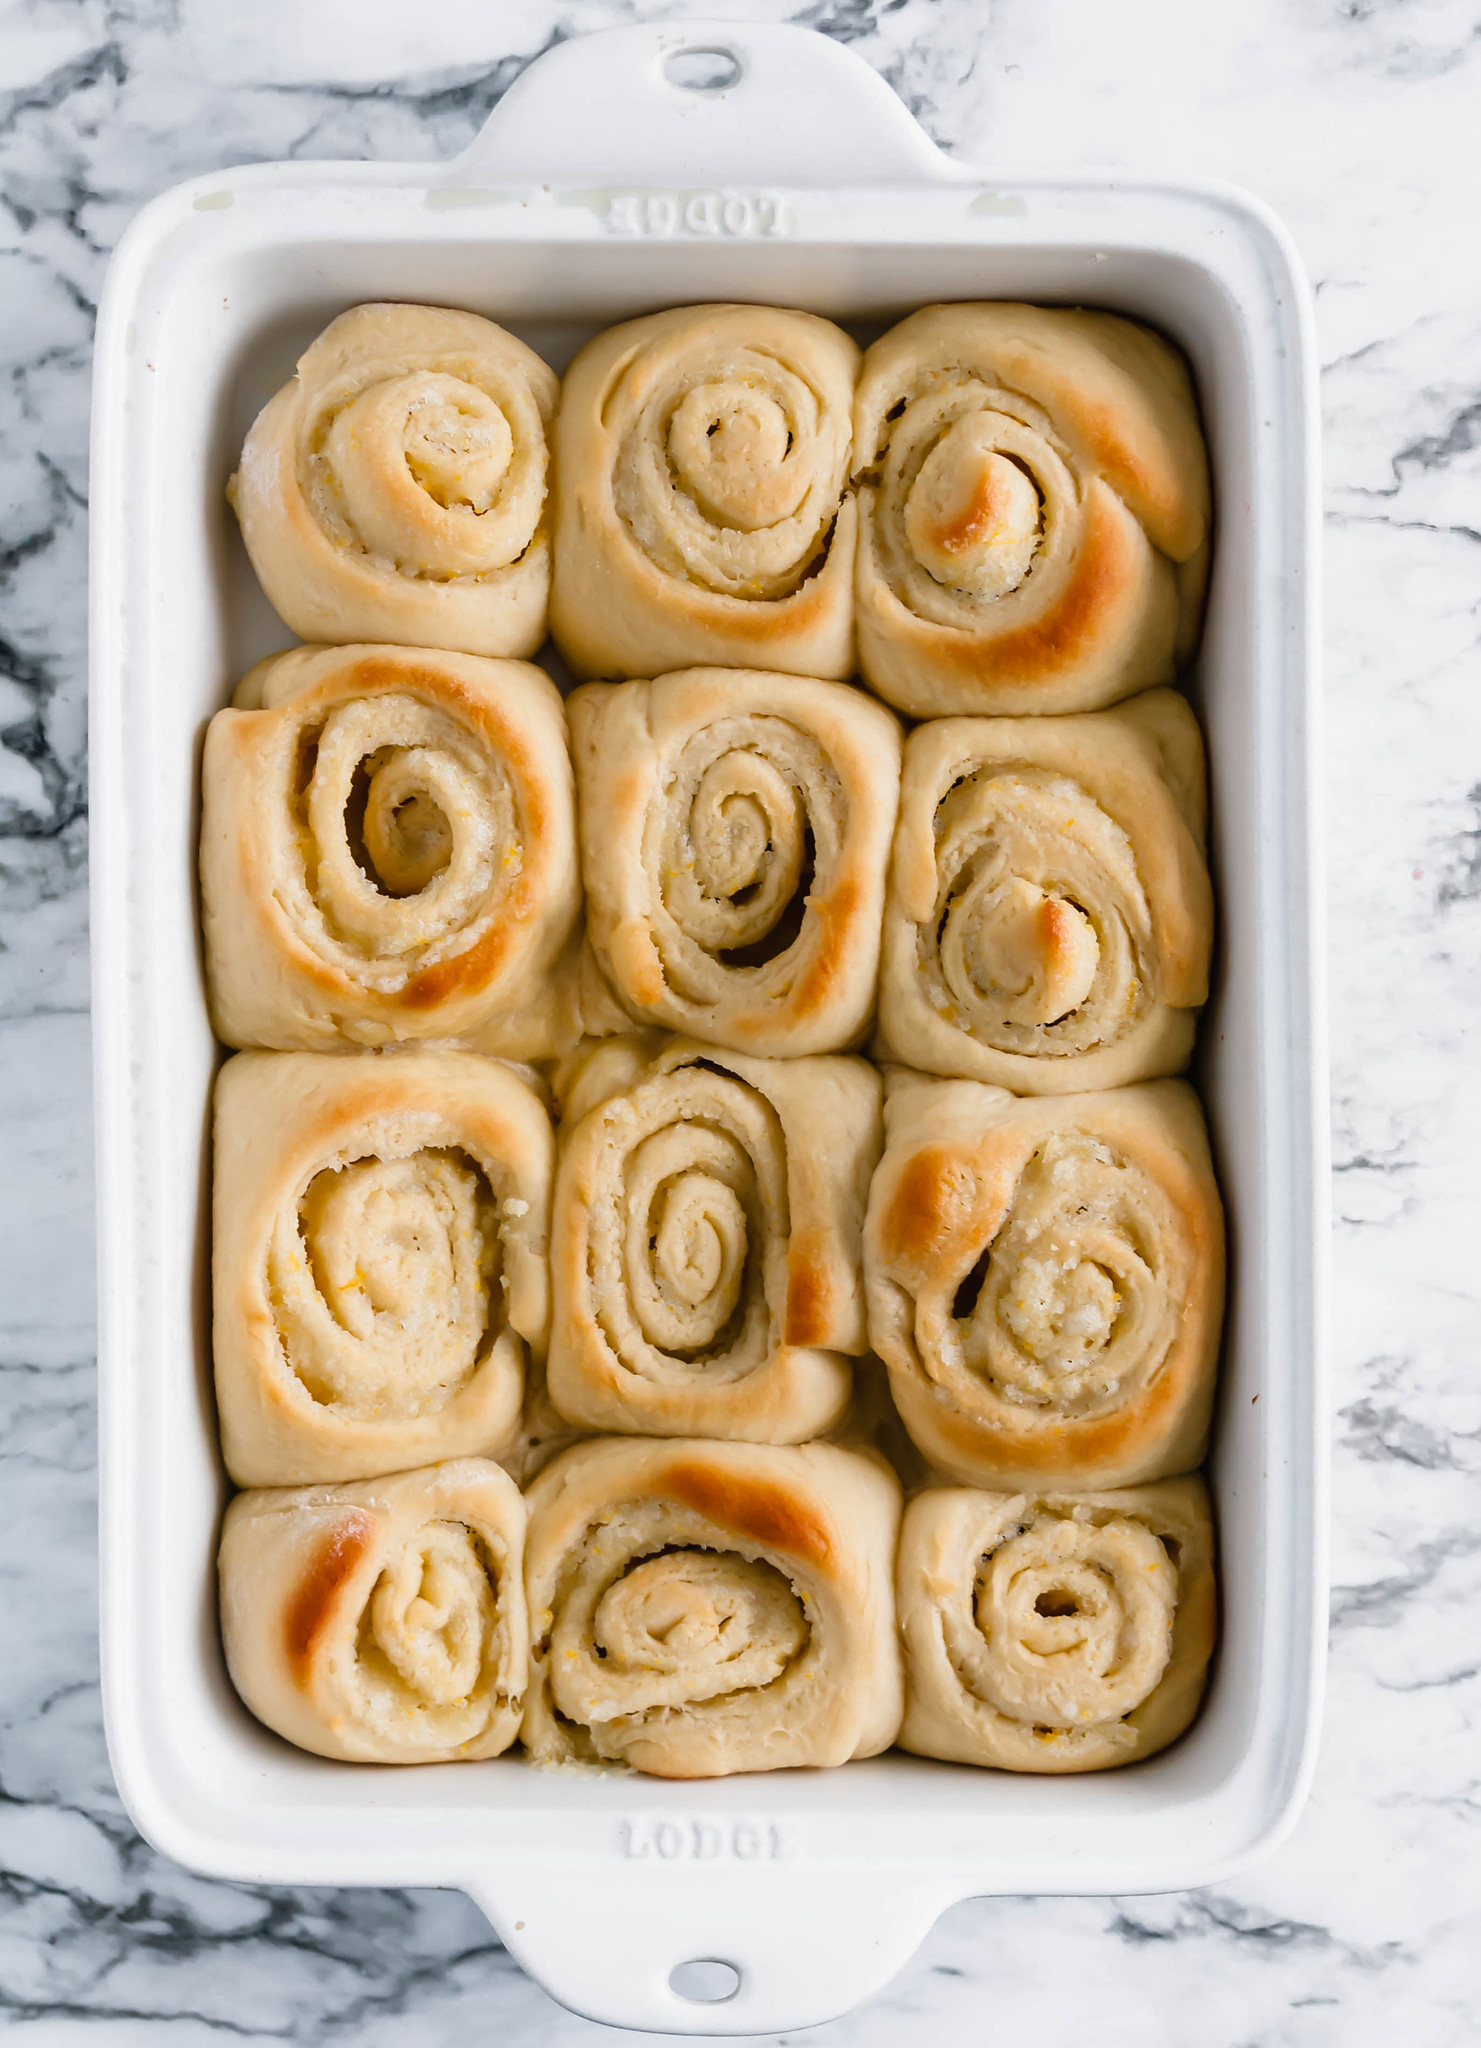 These Homemade Orange Rolls are bursting with fresh, sweet orange flavor. Get ready for tender dough, orange filling and orange scented cream cheese frosting. Perfect Christmas breakfast or weekend breakfast.